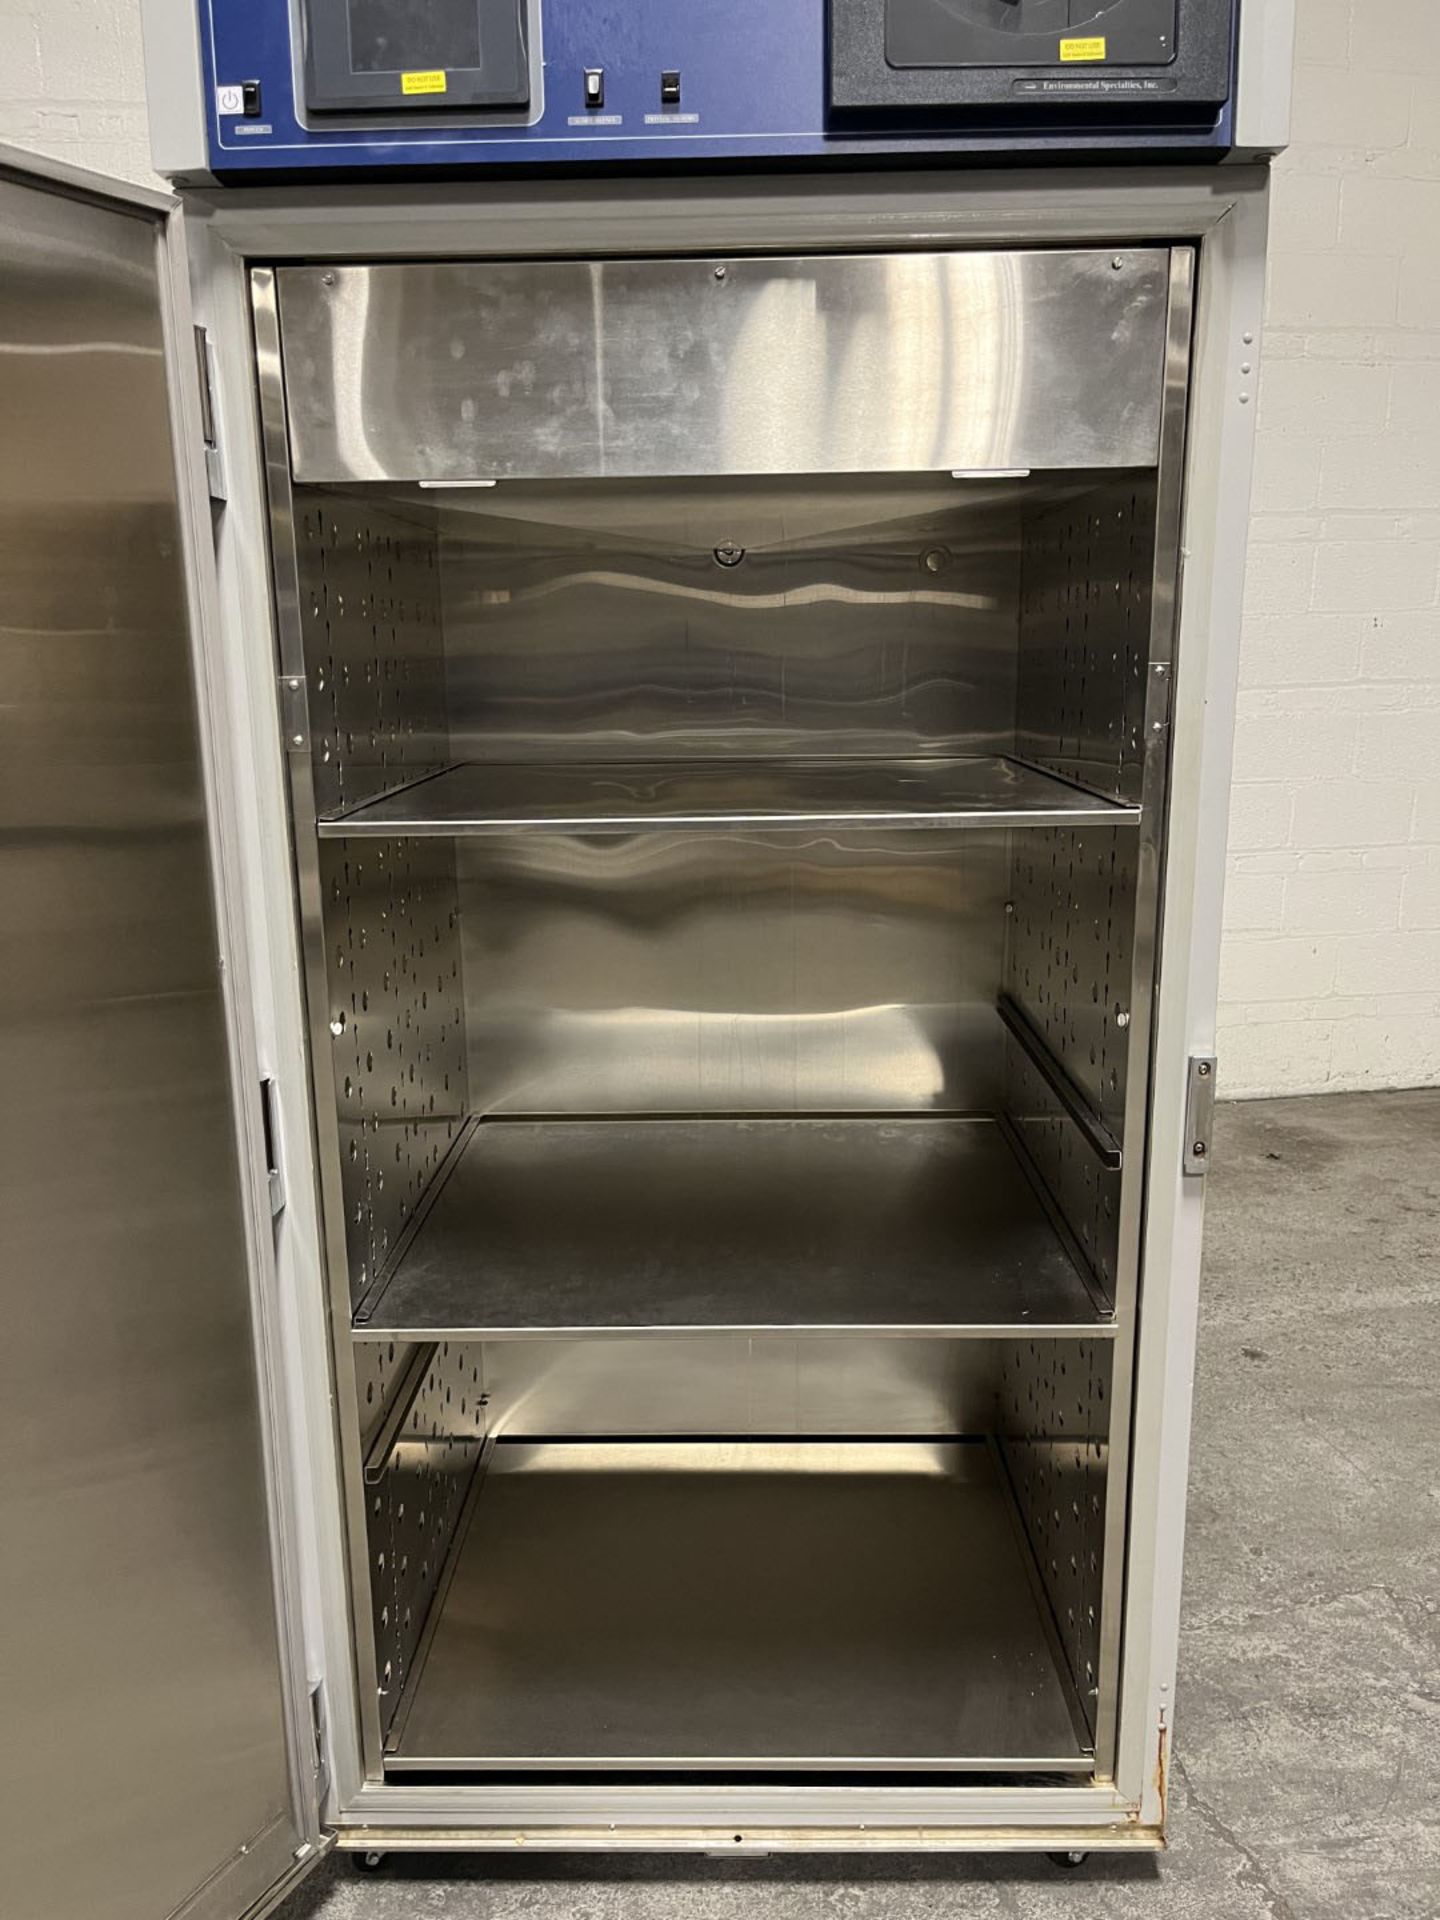 Environmental Specialties stability chamber, model ES2000CDM, stainless steel interior, 34" wide x - Image 2 of 7